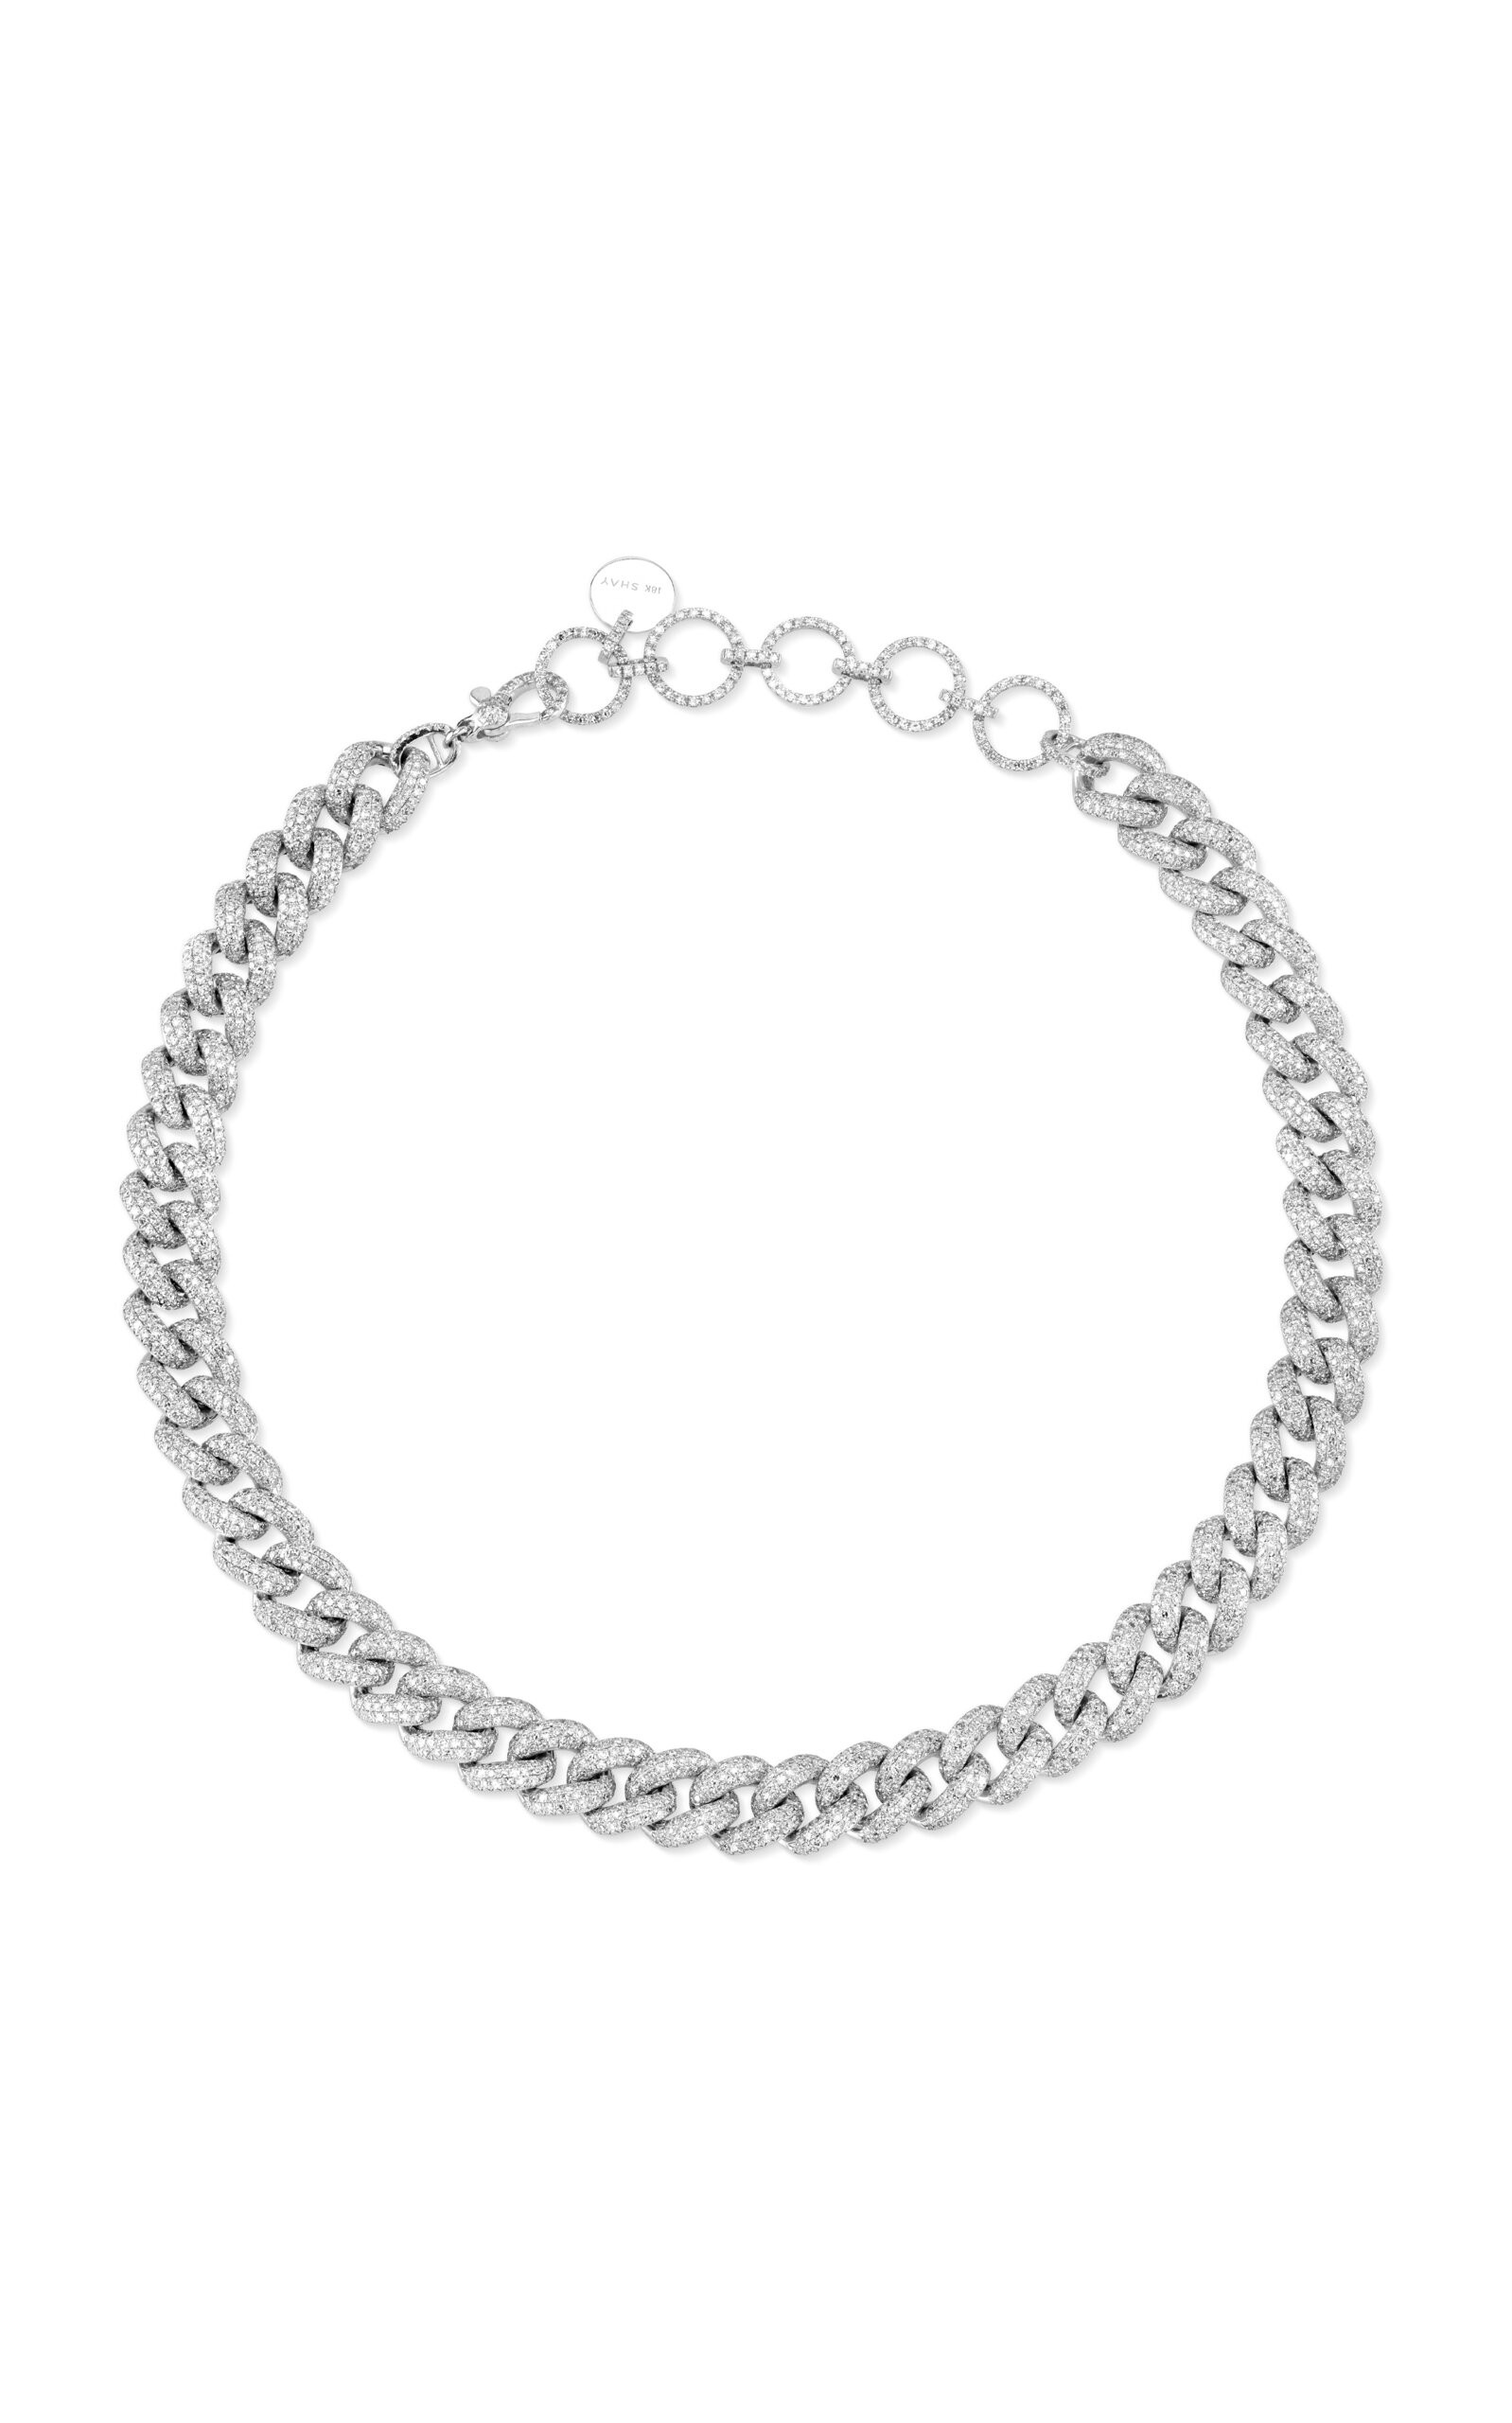 SHAY - 18k White Gold Pave Diamond Esstential Link Choker Necklace - White - OS - Moda Operandi - Gifts For Her